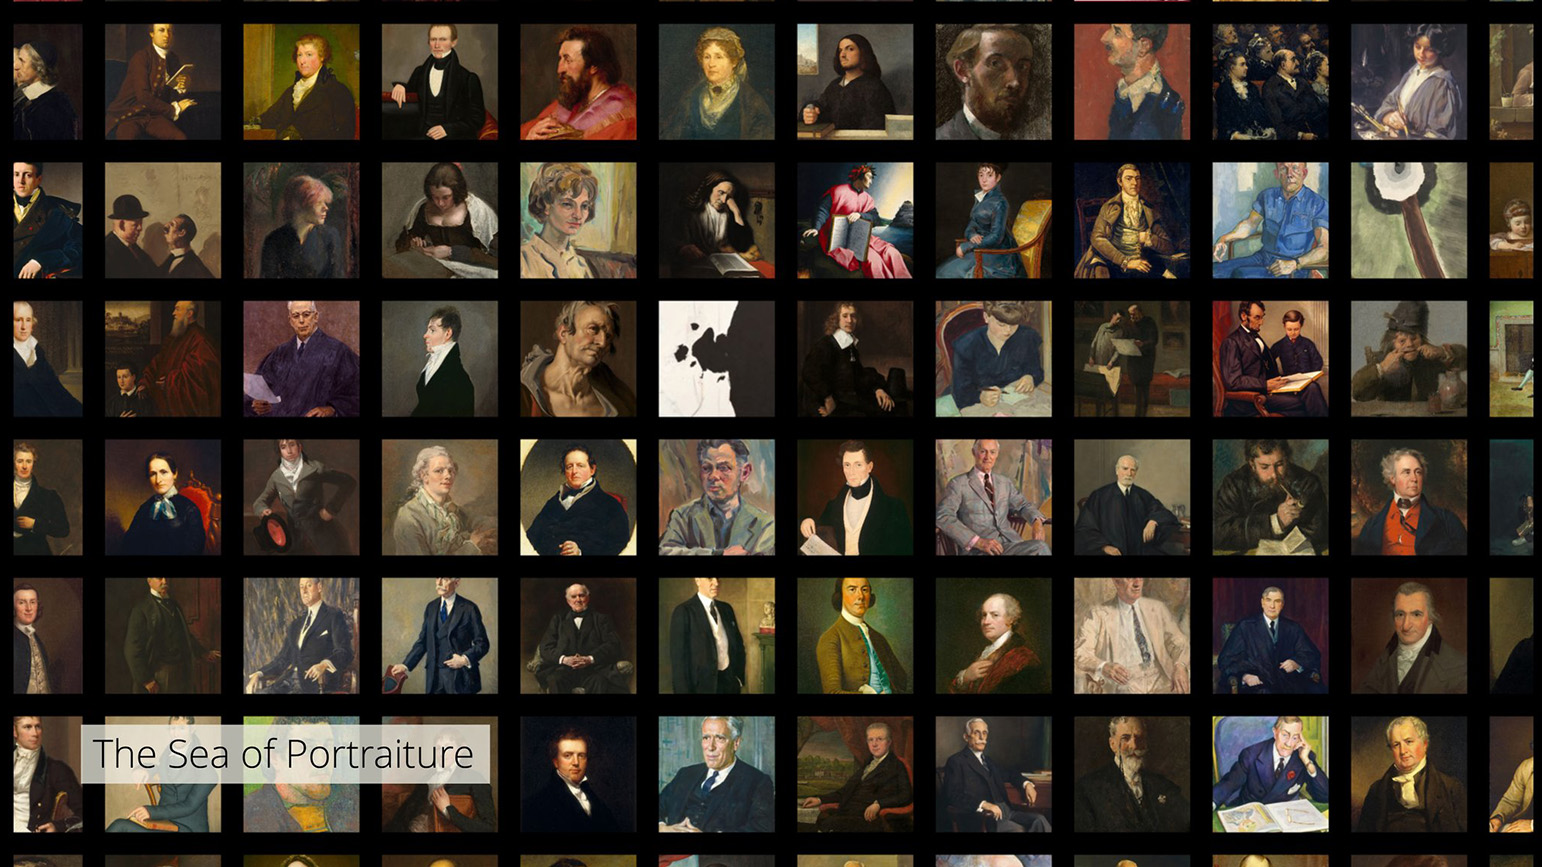 Grid of portraits in the National Gallery of Art collection